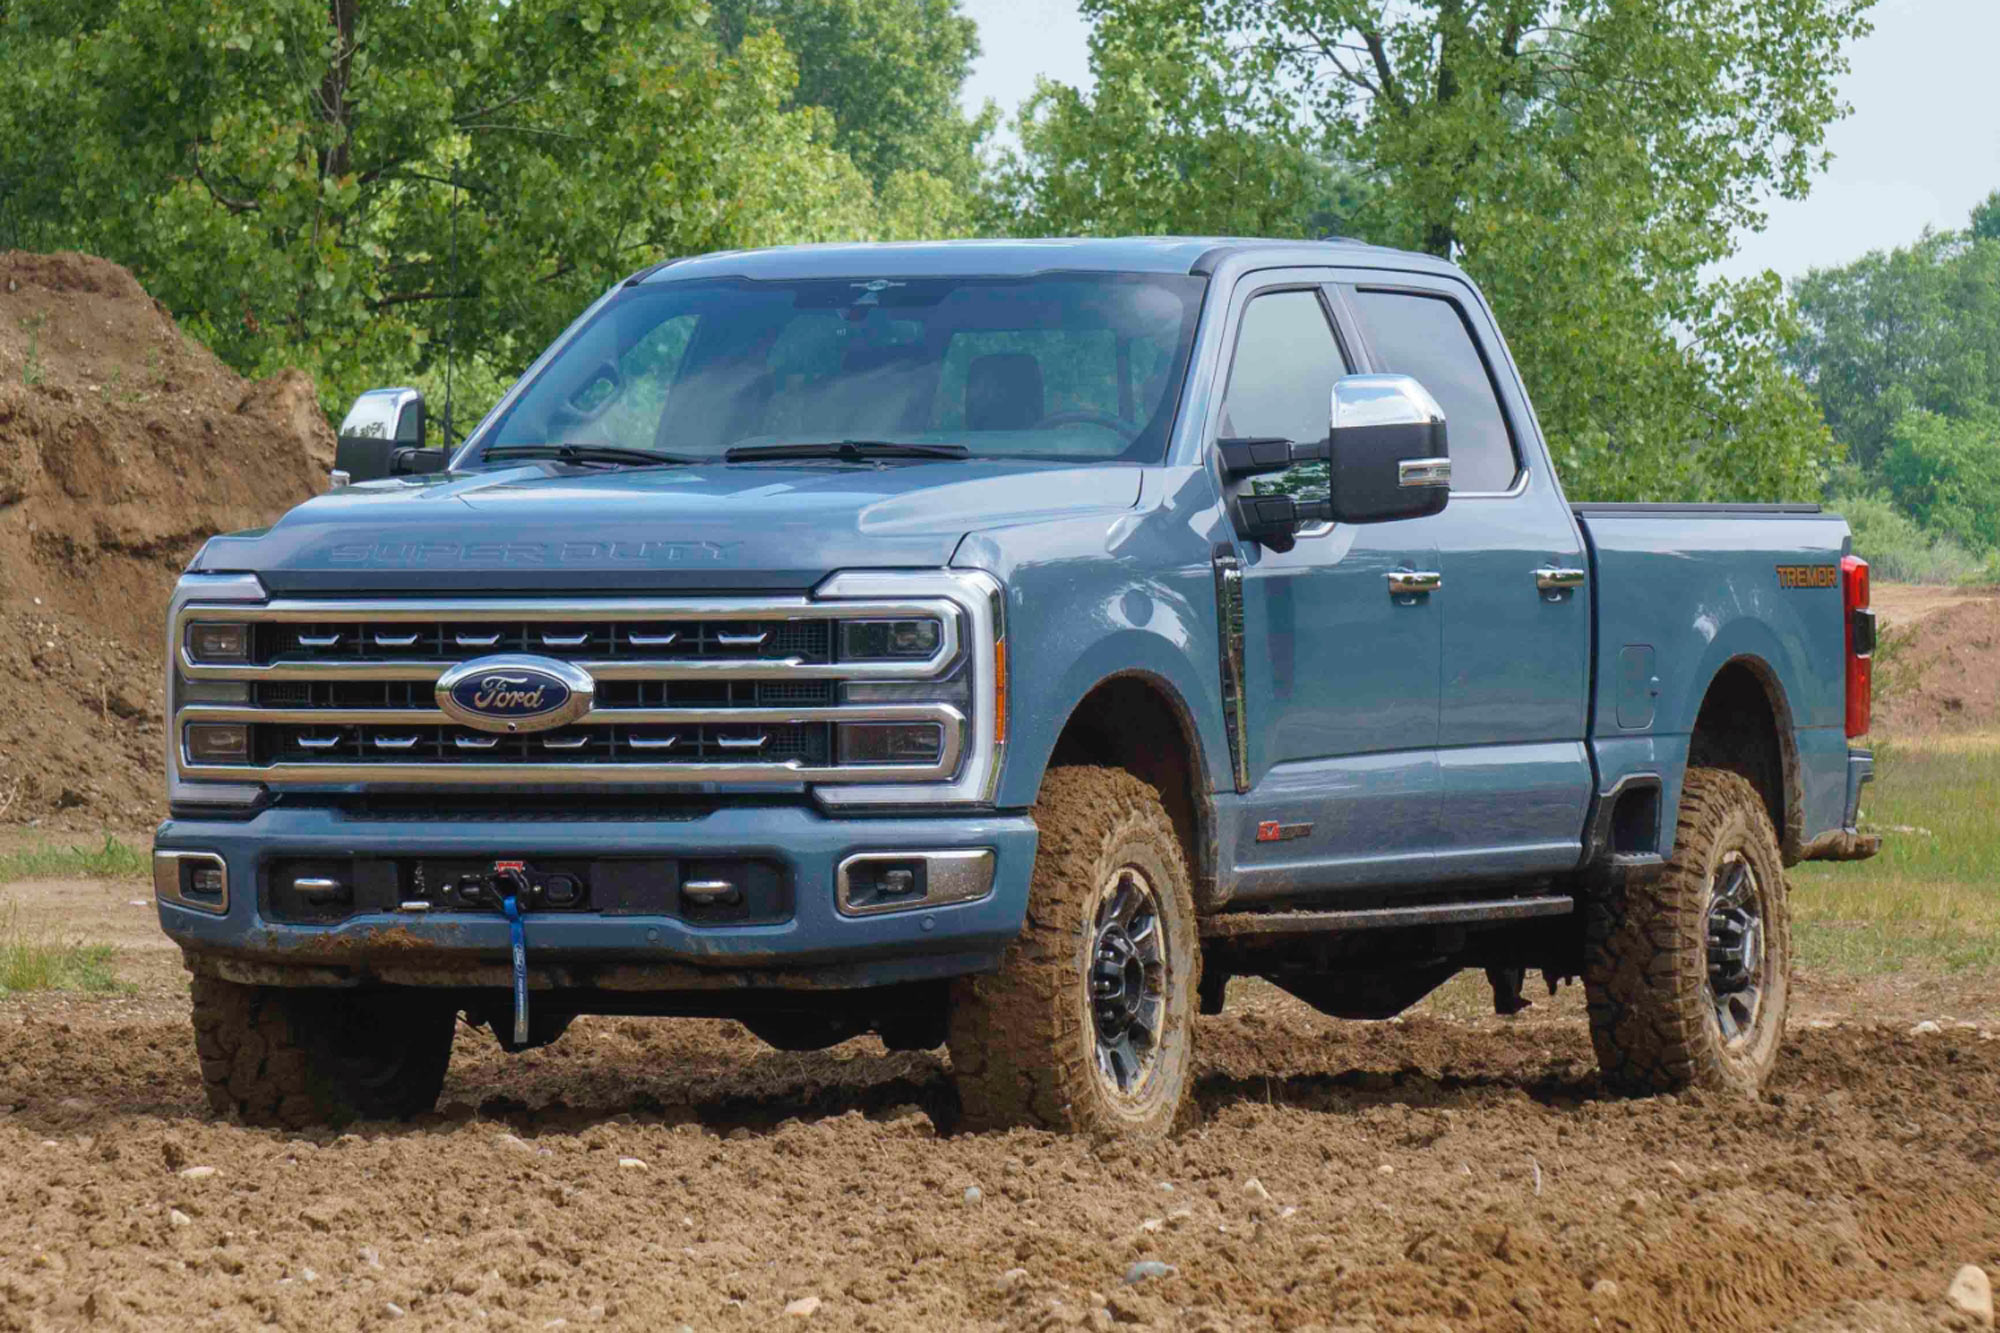 2023 Ford F-250 Super Duty Tremor in blue front quarter parked in the dirt